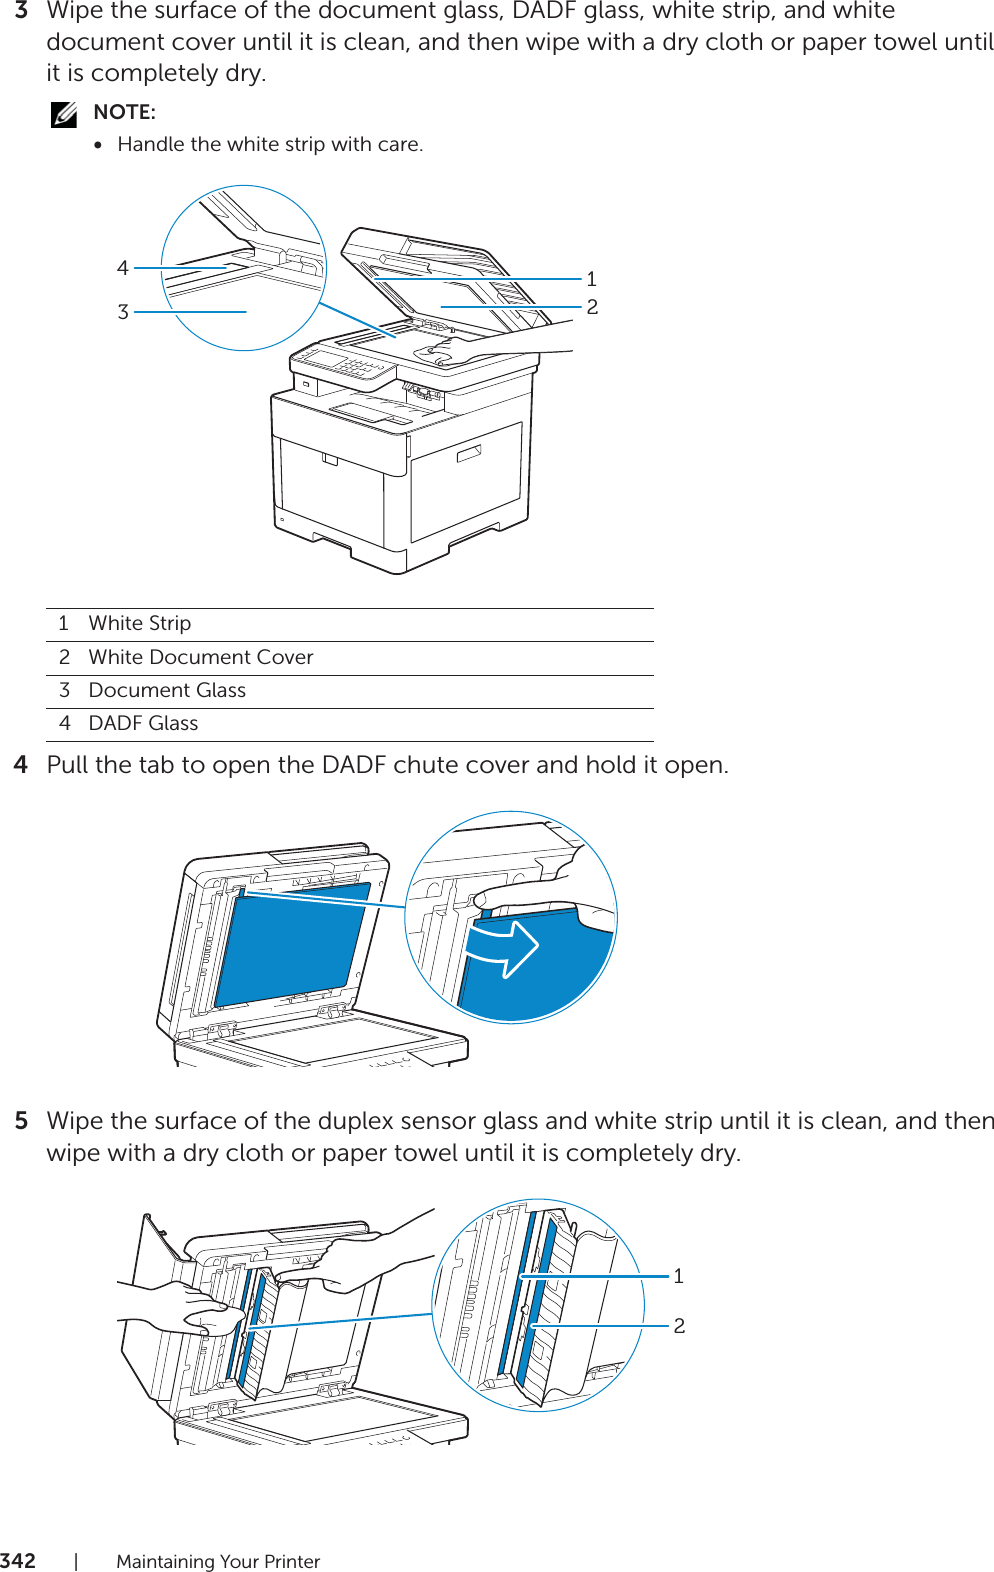 342| Maintaining Your Printer3Wipe the surface of the document glass, DADF glass, white strip, and white document cover until it is clean, and then wipe with a dry cloth or paper towel until it is completely dry.NOTE:•Handle the white strip with care.4Pull the tab to open the DADF chute cover and hold it open.5Wipe the surface of the duplex sensor glass and white strip until it is clean, and then wipe with a dry cloth or paper towel until it is completely dry.1White Strip2White Document Cover3Document Glass4DADF Glass431212